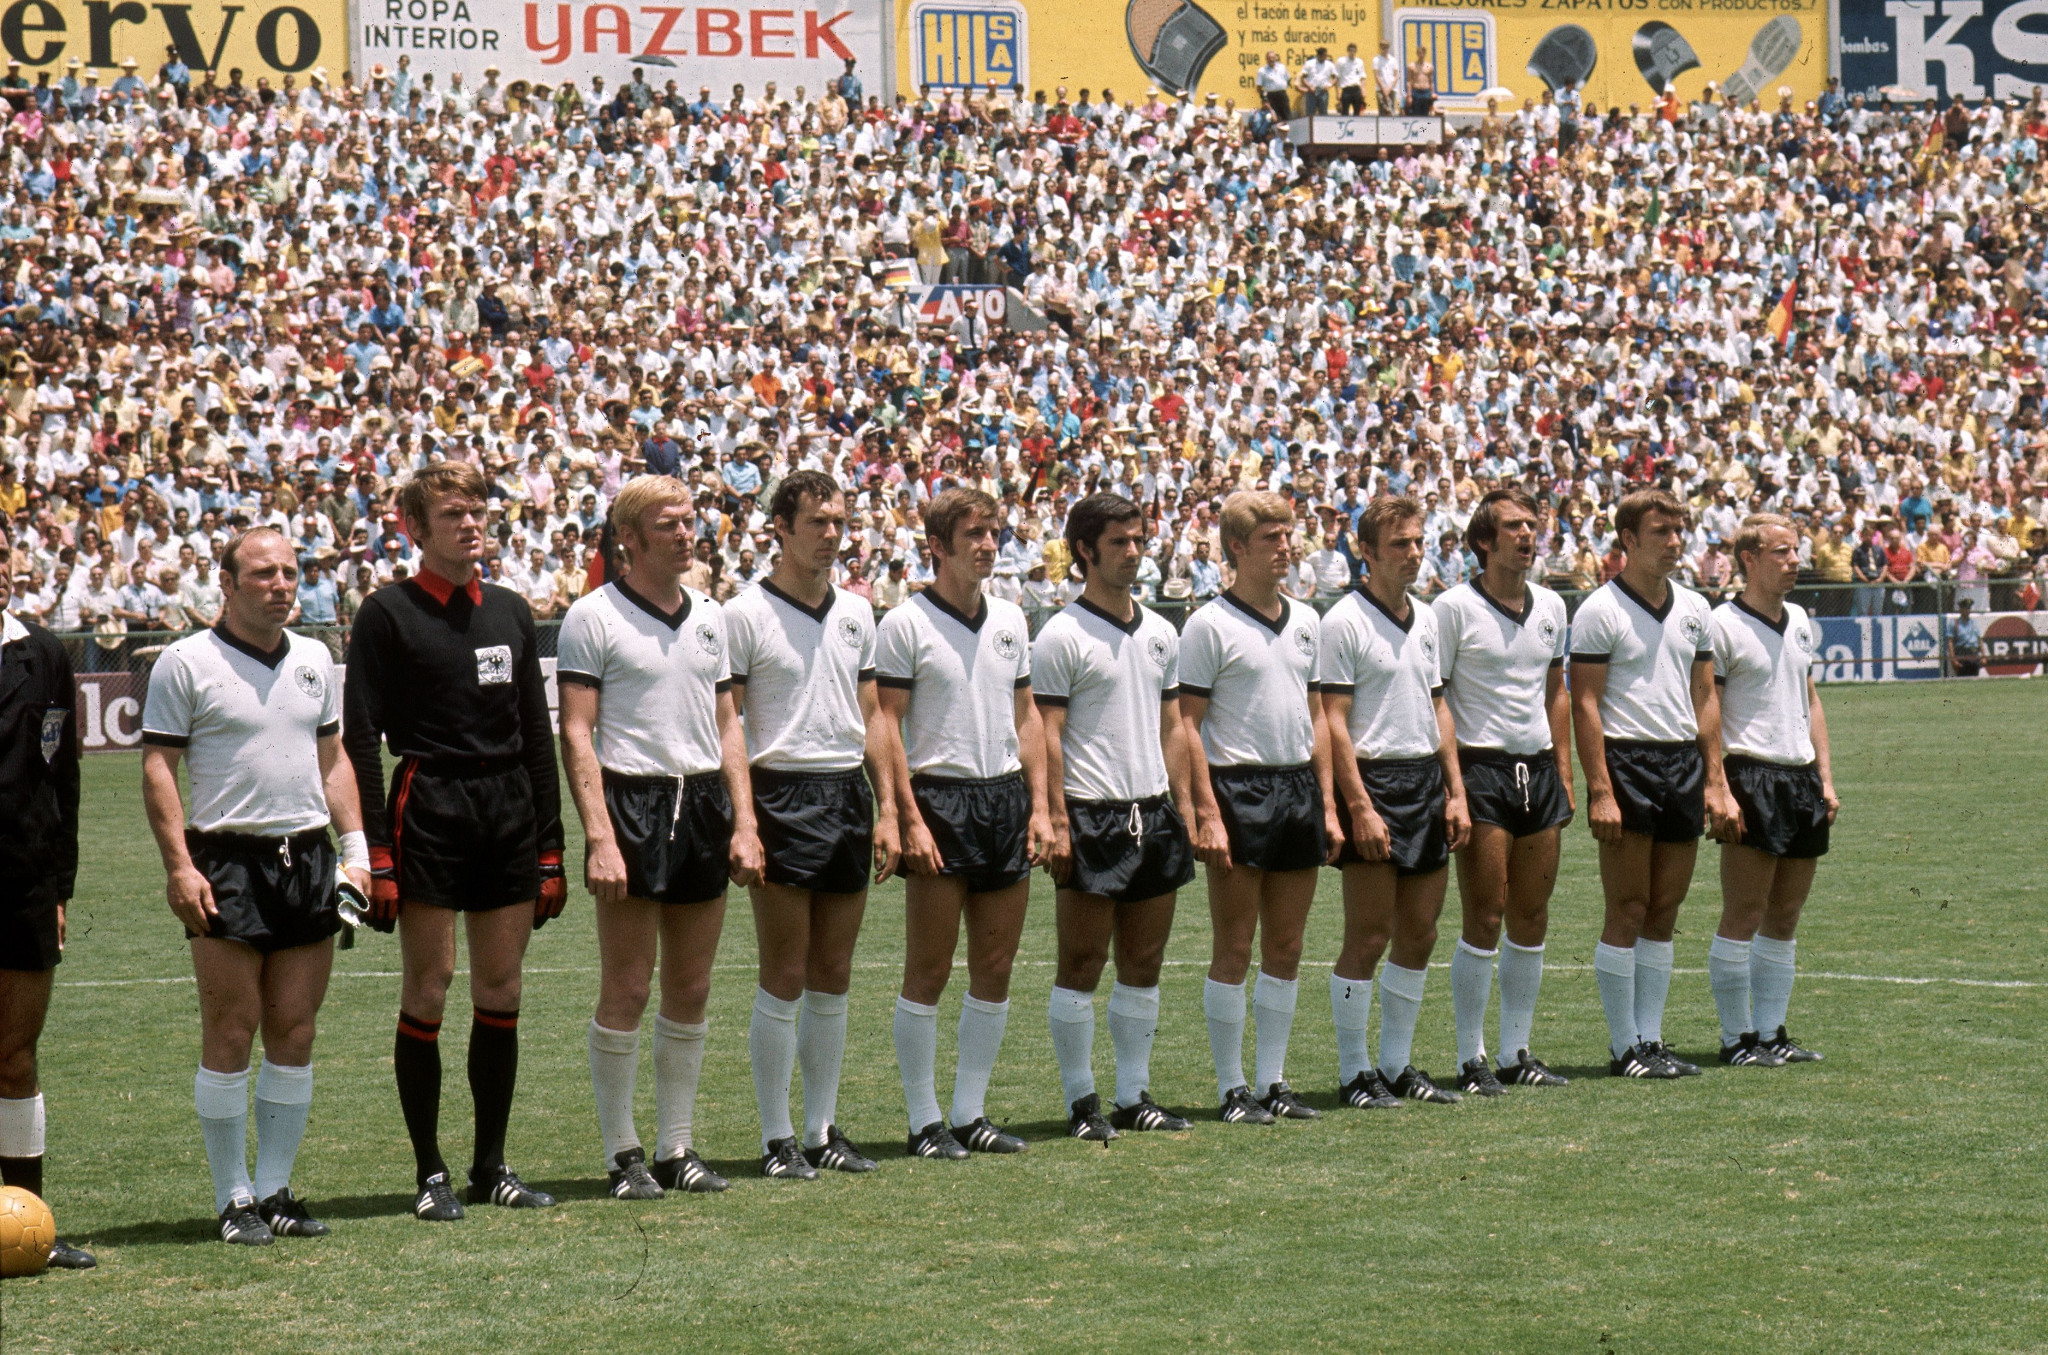 The West German team, including Gerd Müller in the centre of the line-up ©Getty Images